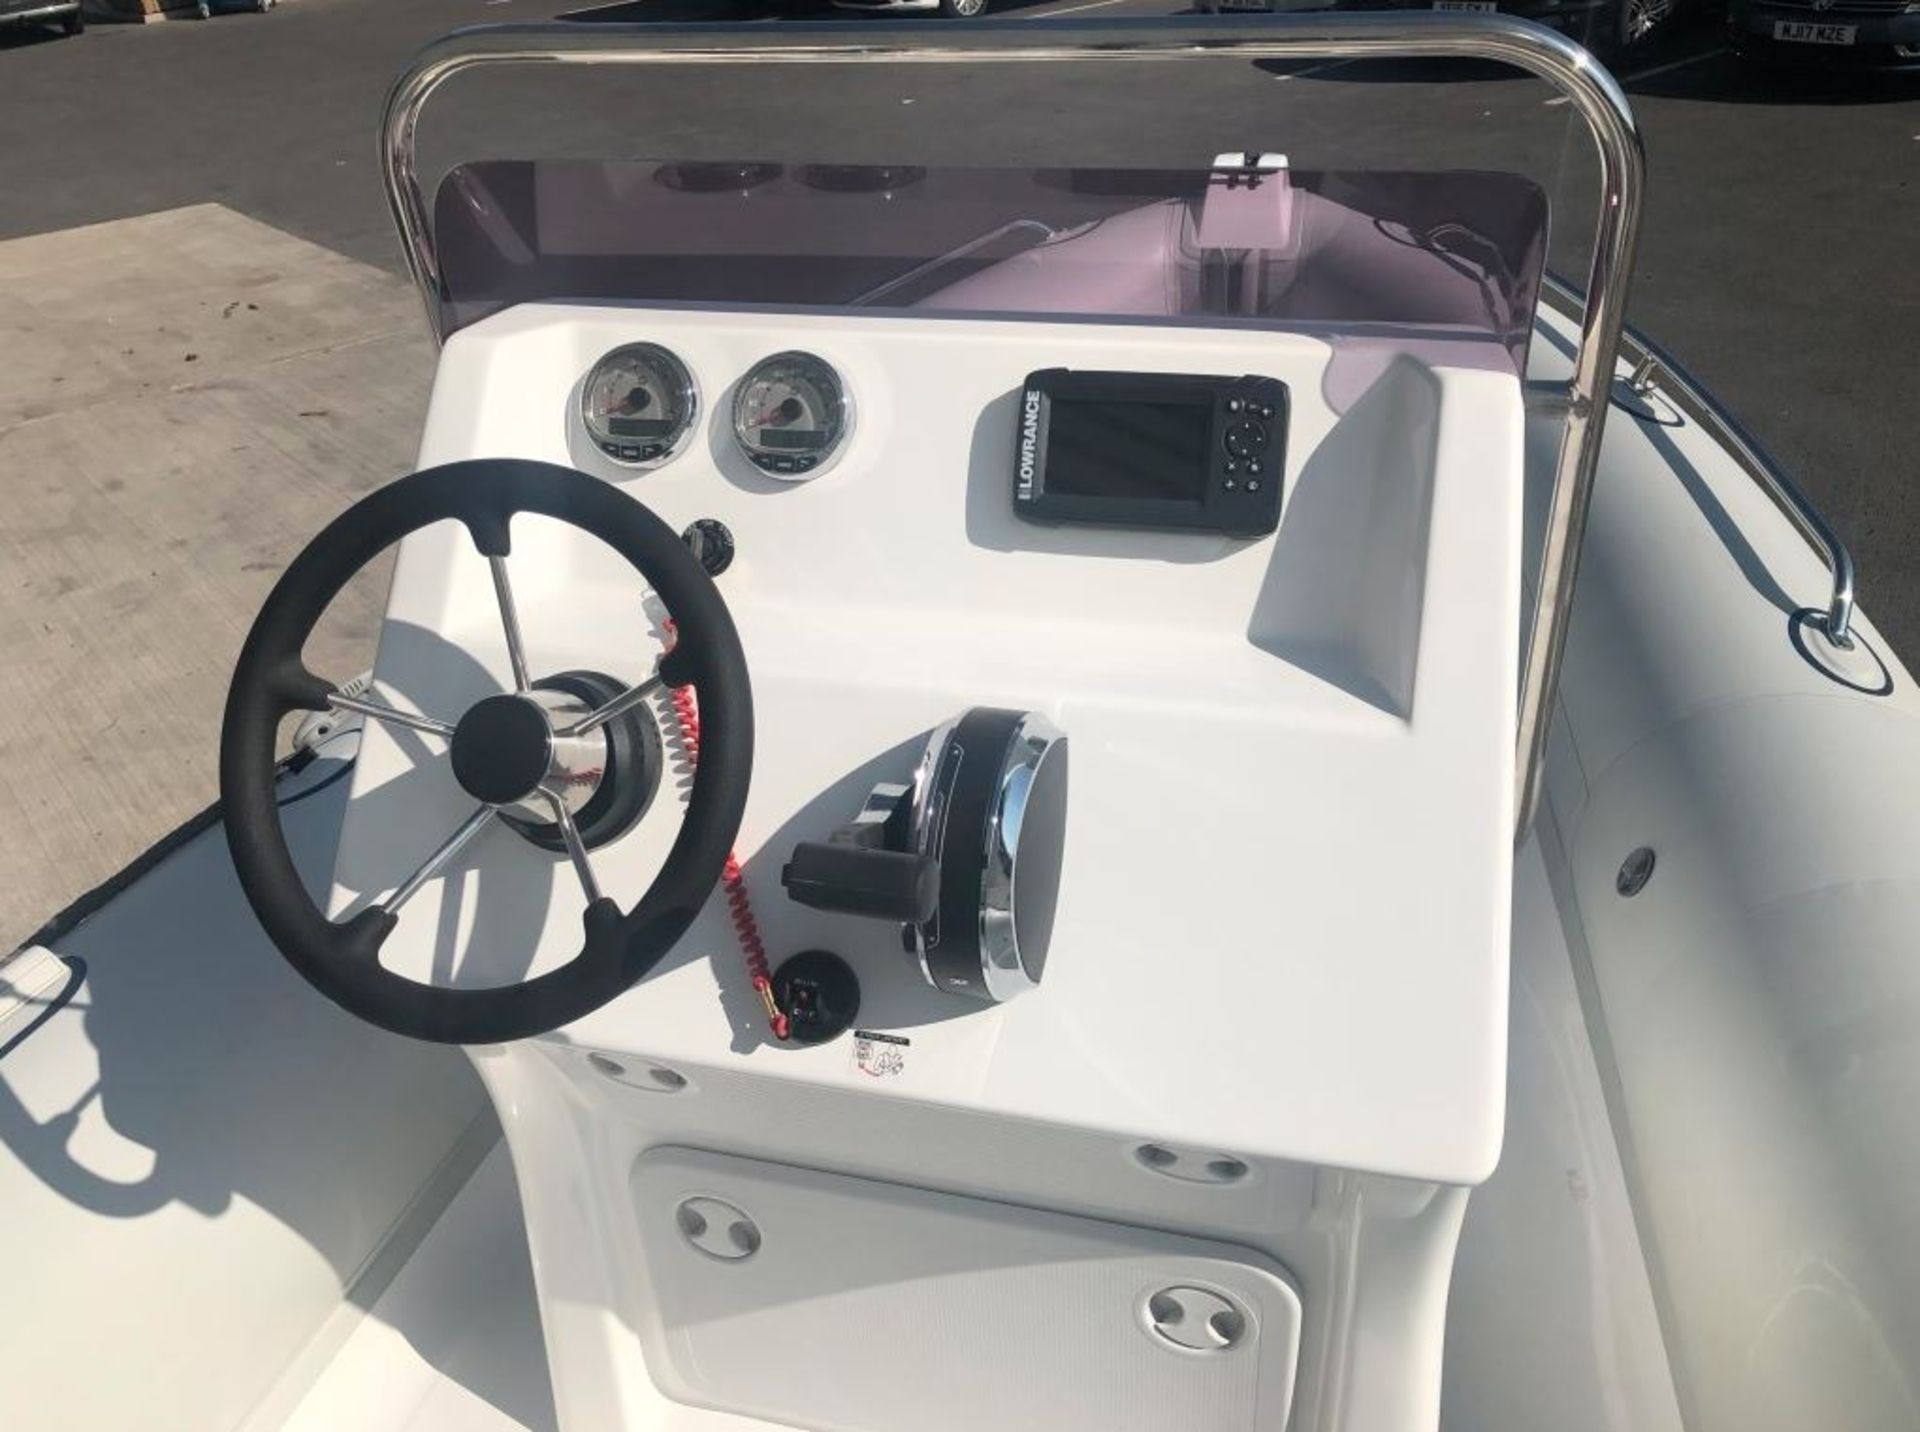 Infanta 5.8LRi Rib Complete With 115hp Mercury 4stroke and Trailer - Image 11 of 17